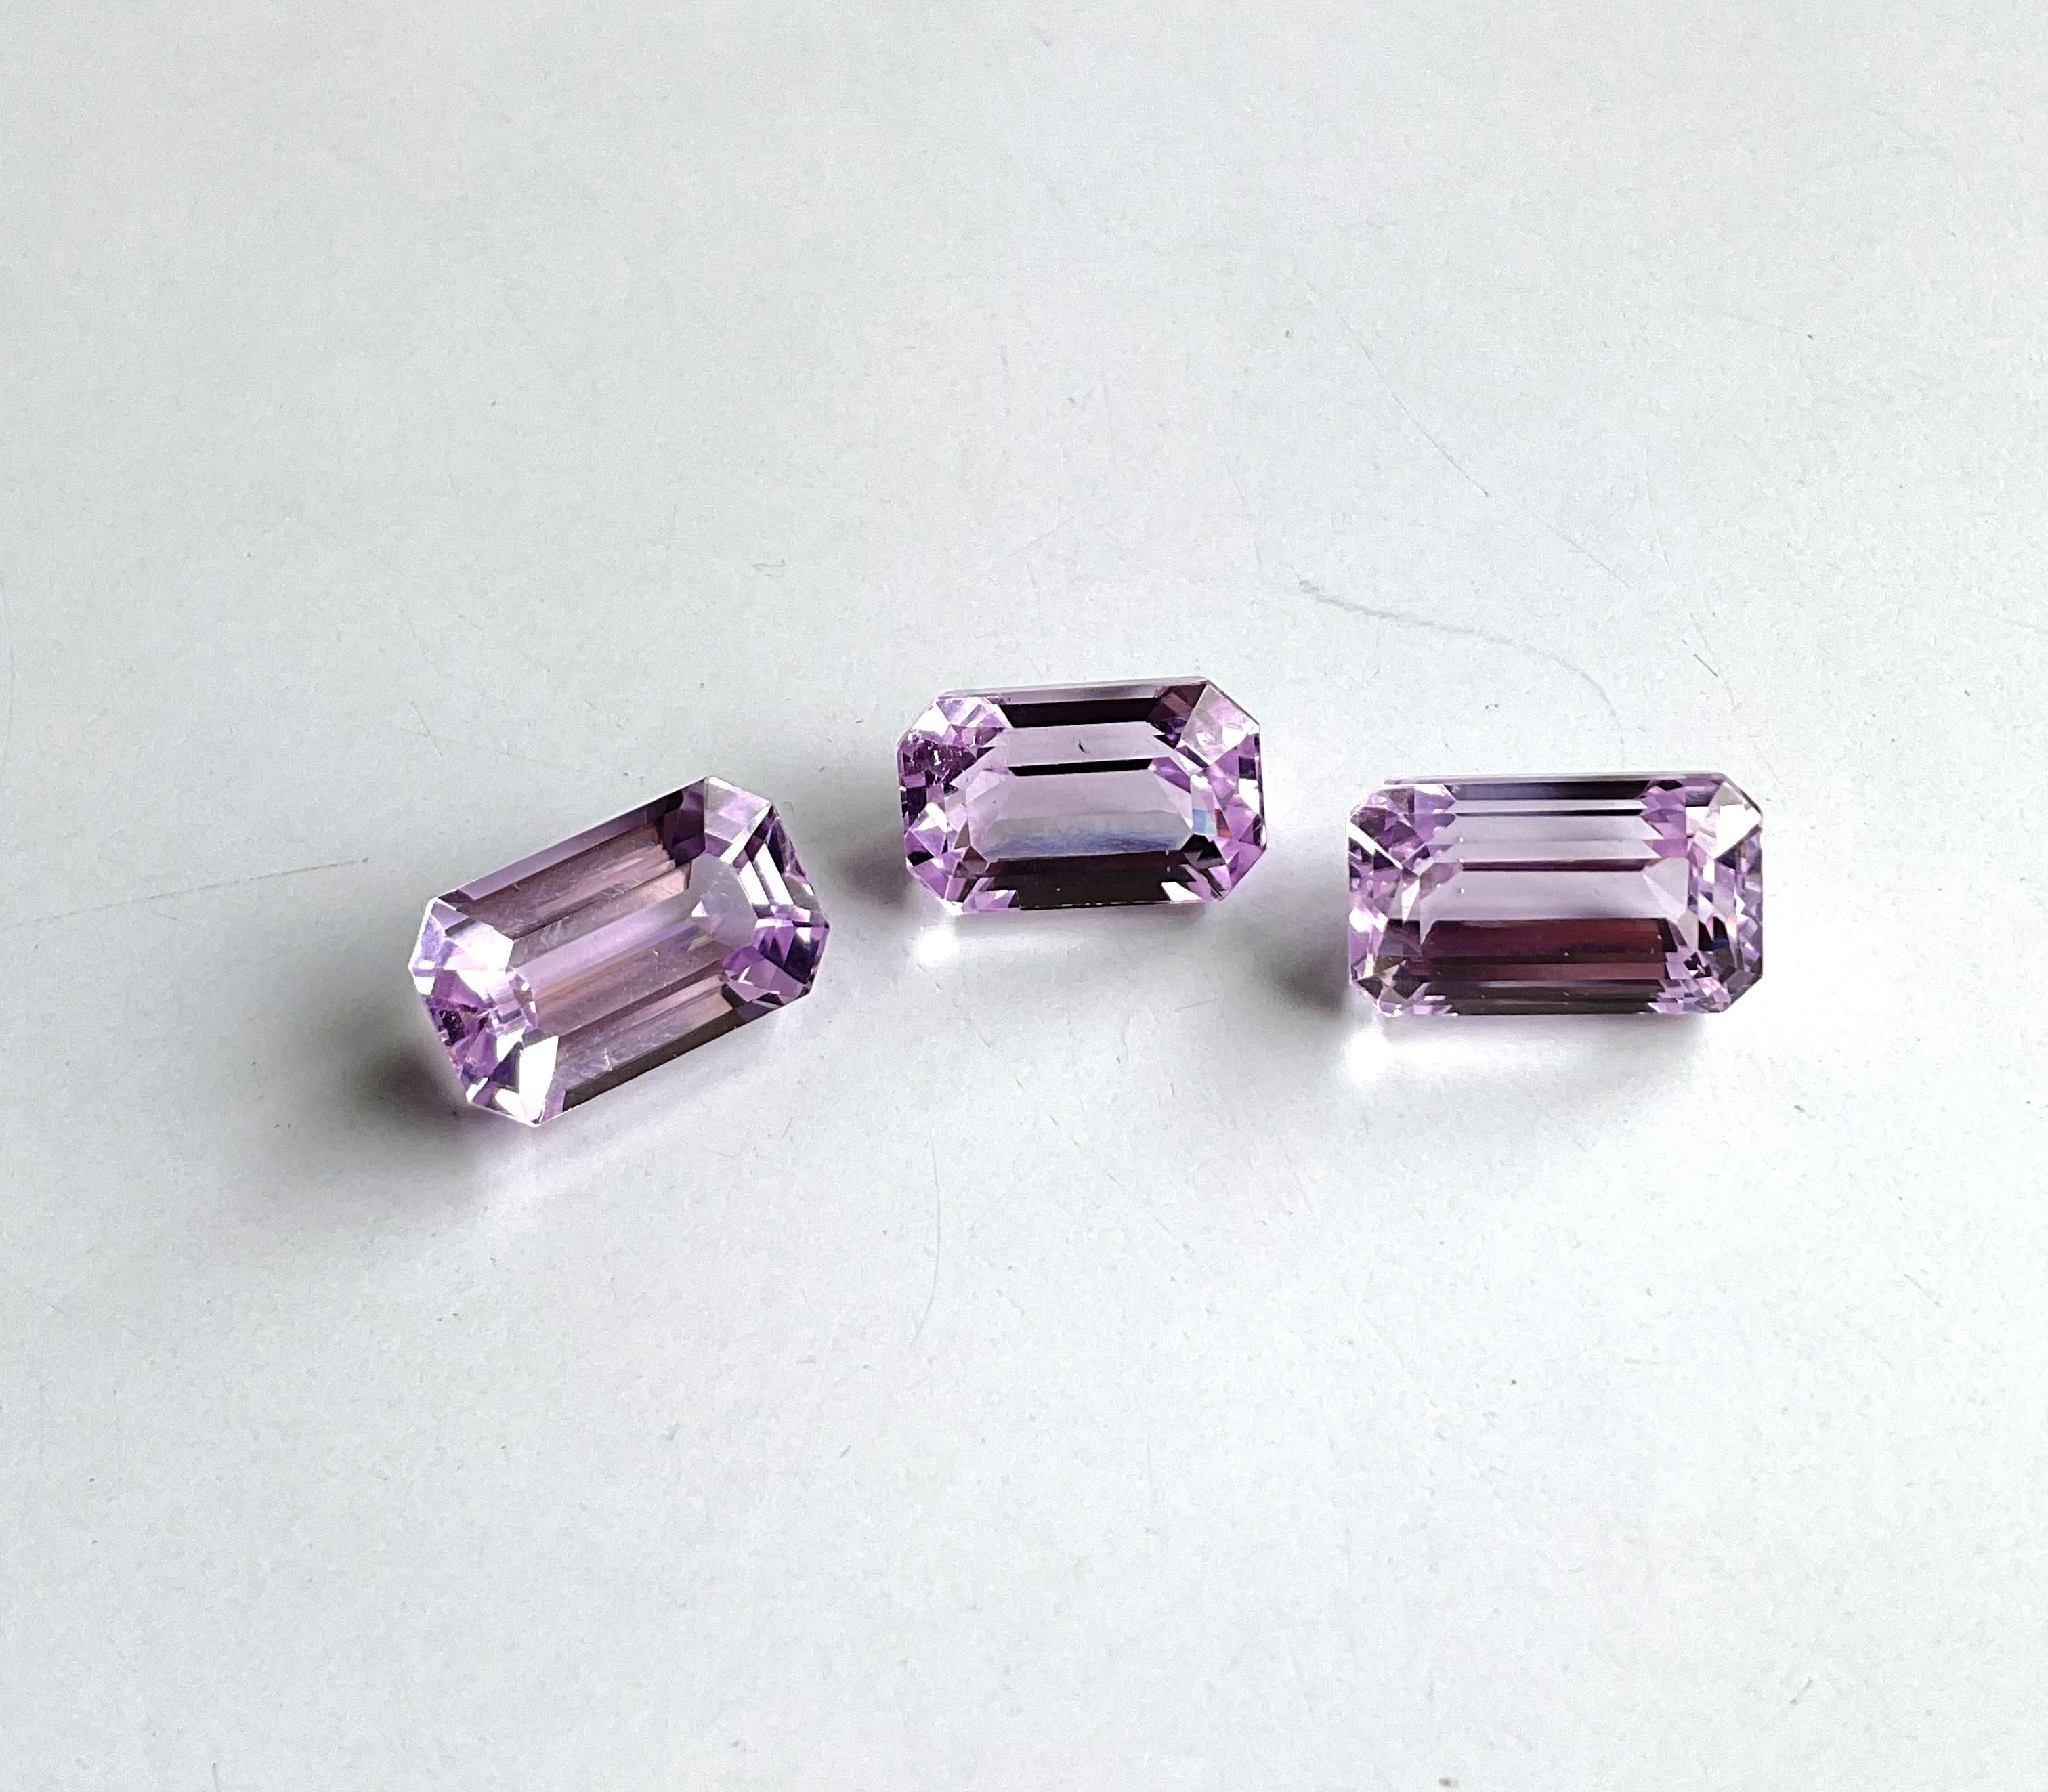 34.29 Carats Pink Kunzite Octagon Natural Cut Stones For Fine Gem Jewellery For Sale 4